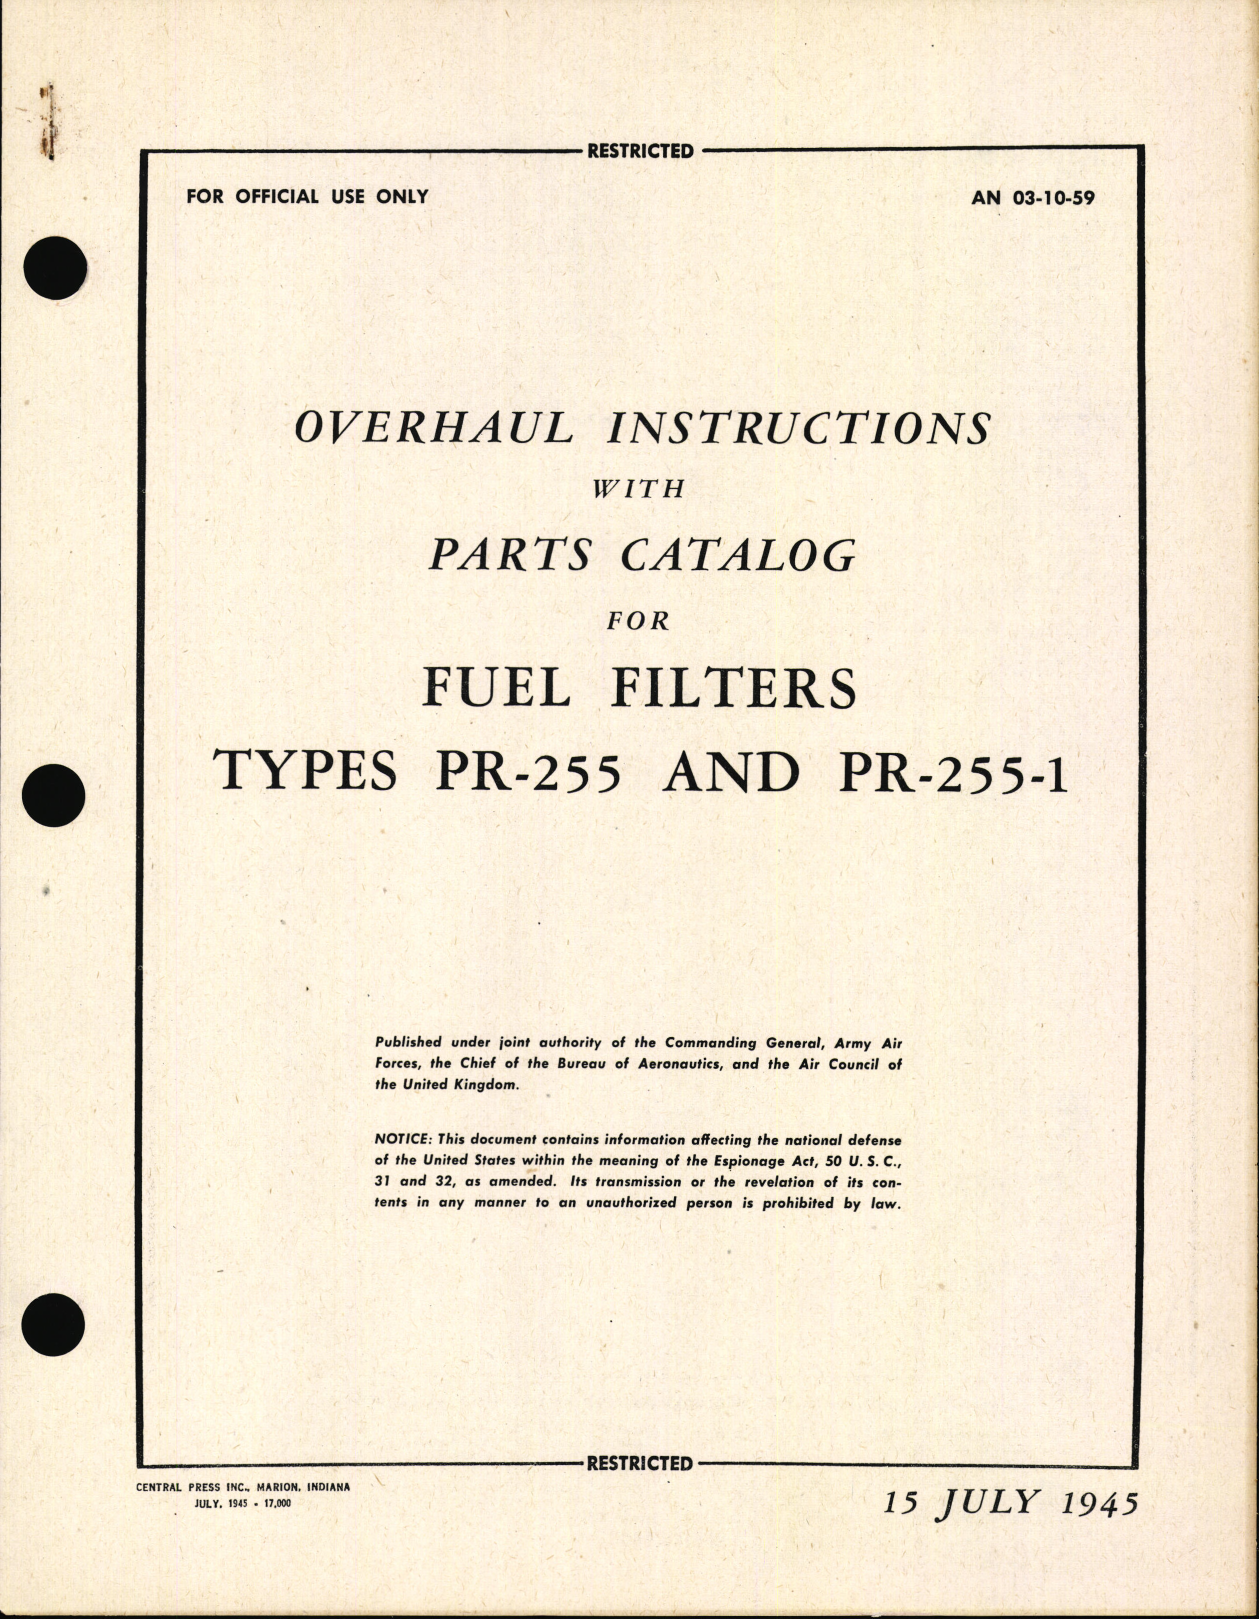 Sample page 1 from AirCorps Library document: Overhaul Instructions with Parts Catalog for Fuel Filters Types PR-255 and PR-255-1